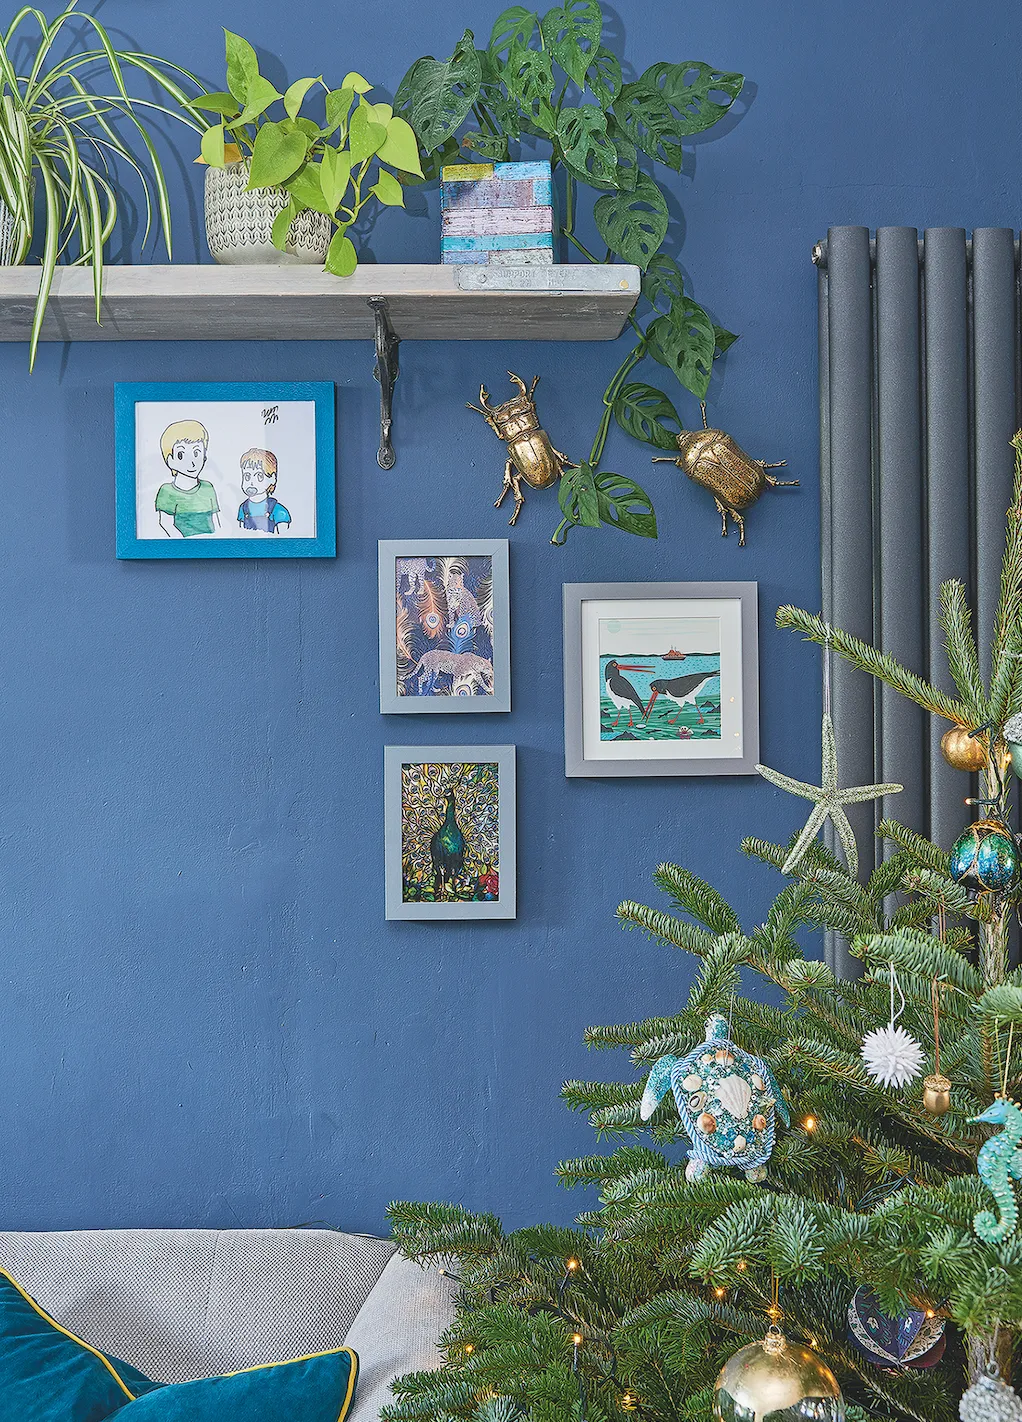 Nikki’s teal sofa was the catalyst for her bold colour choices throughout the house. She’s lifted her dark walls with green accents. ‘I wanted a calming space with an outside-in theme, so I’ve slowly added to our plant collection to create that,’ she says